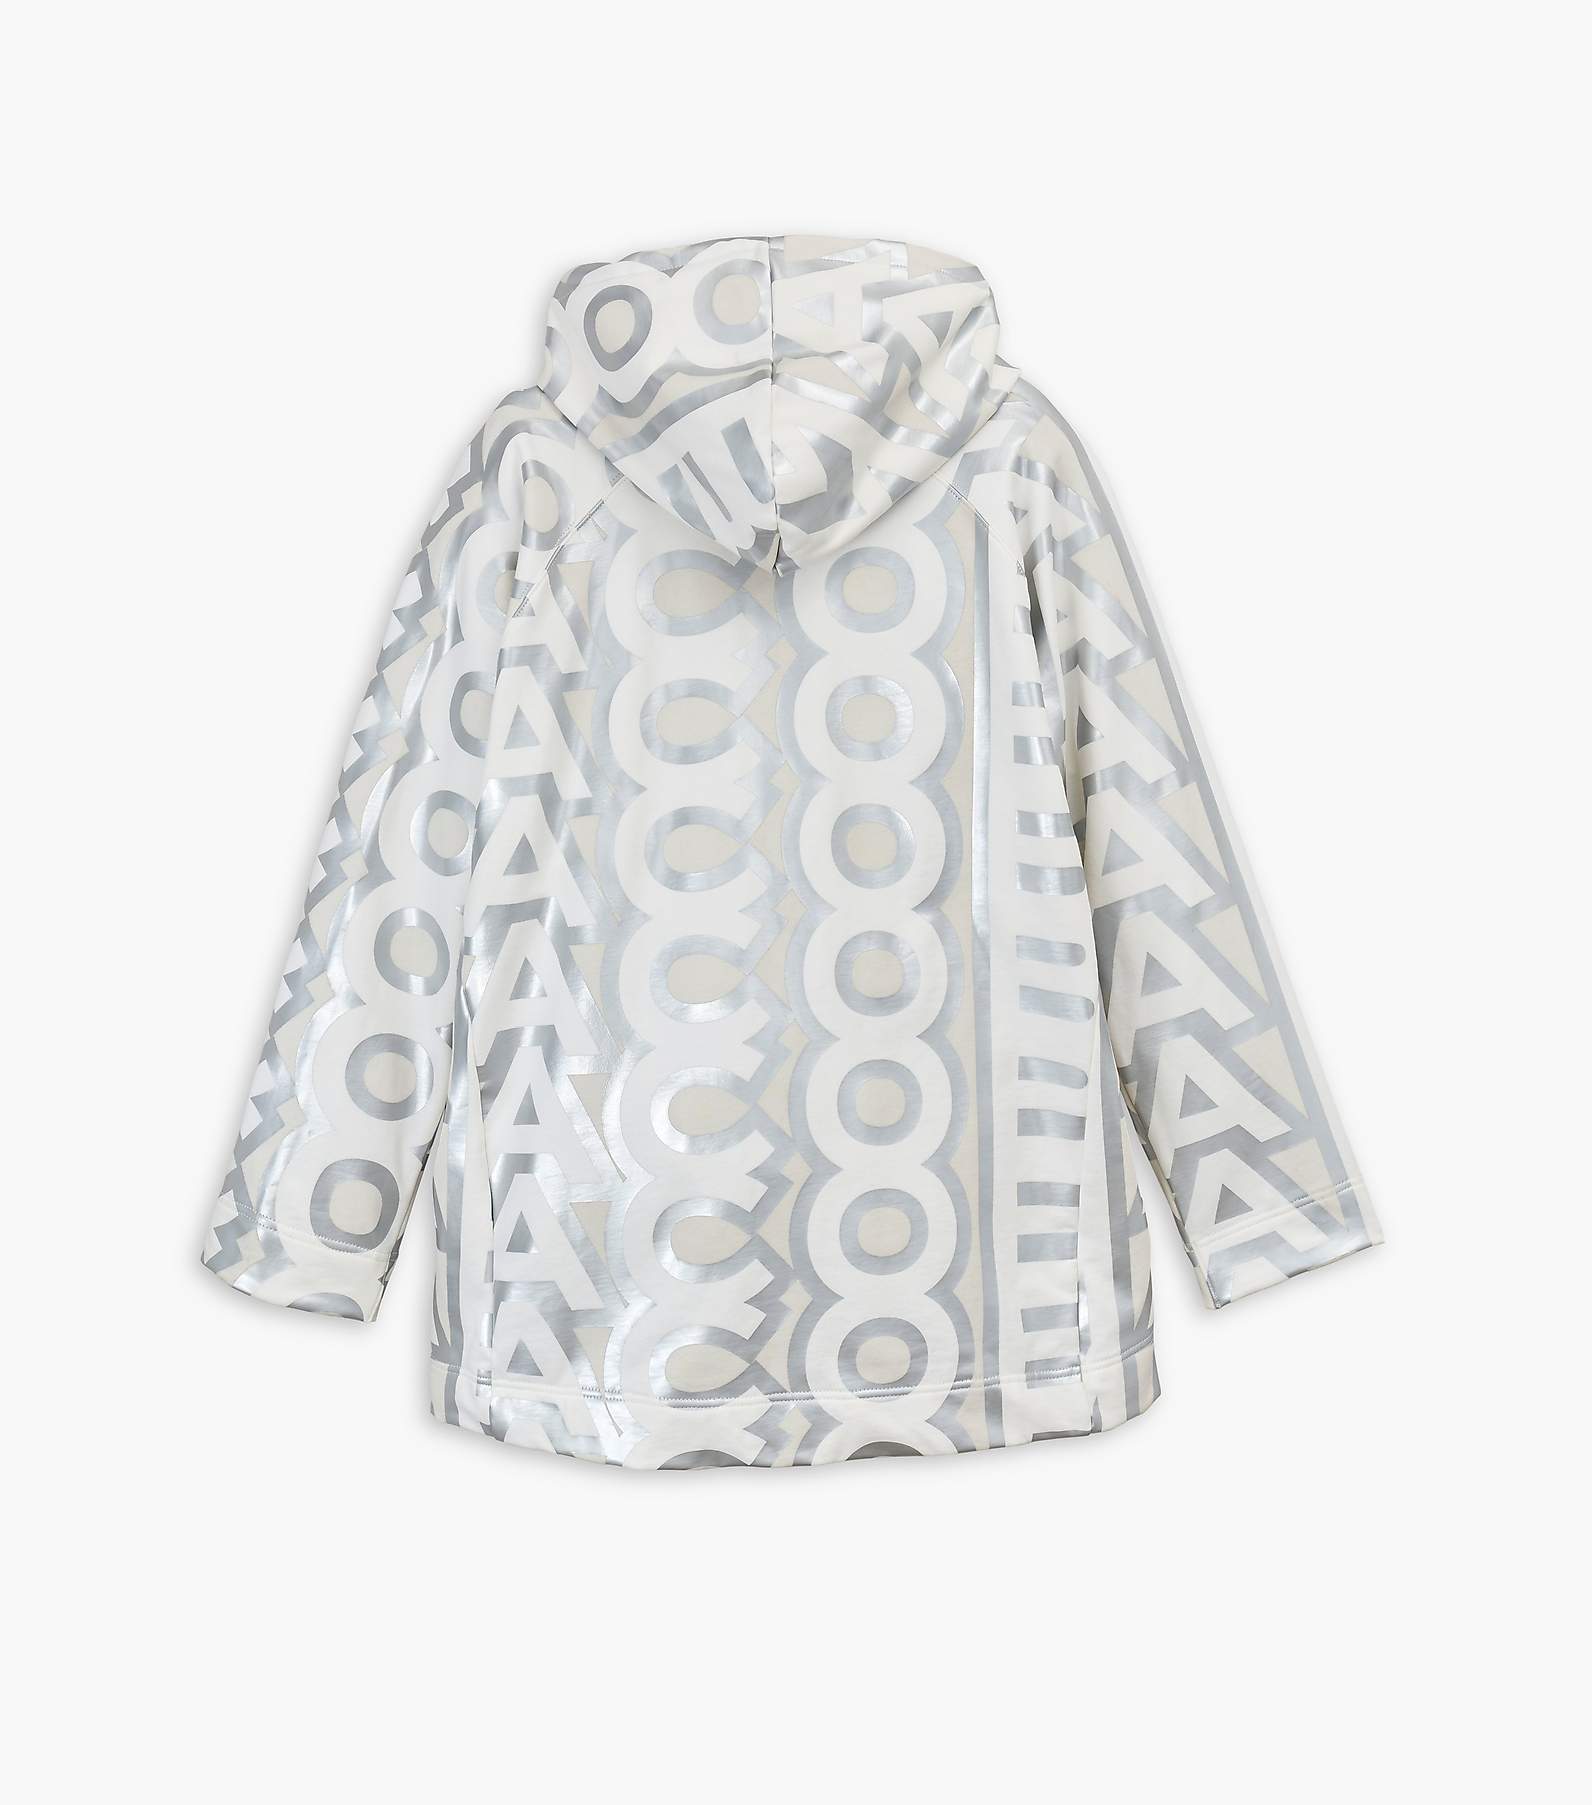 The Monogram Zip Hoodie in Silver/Bright White, Size XS/Small